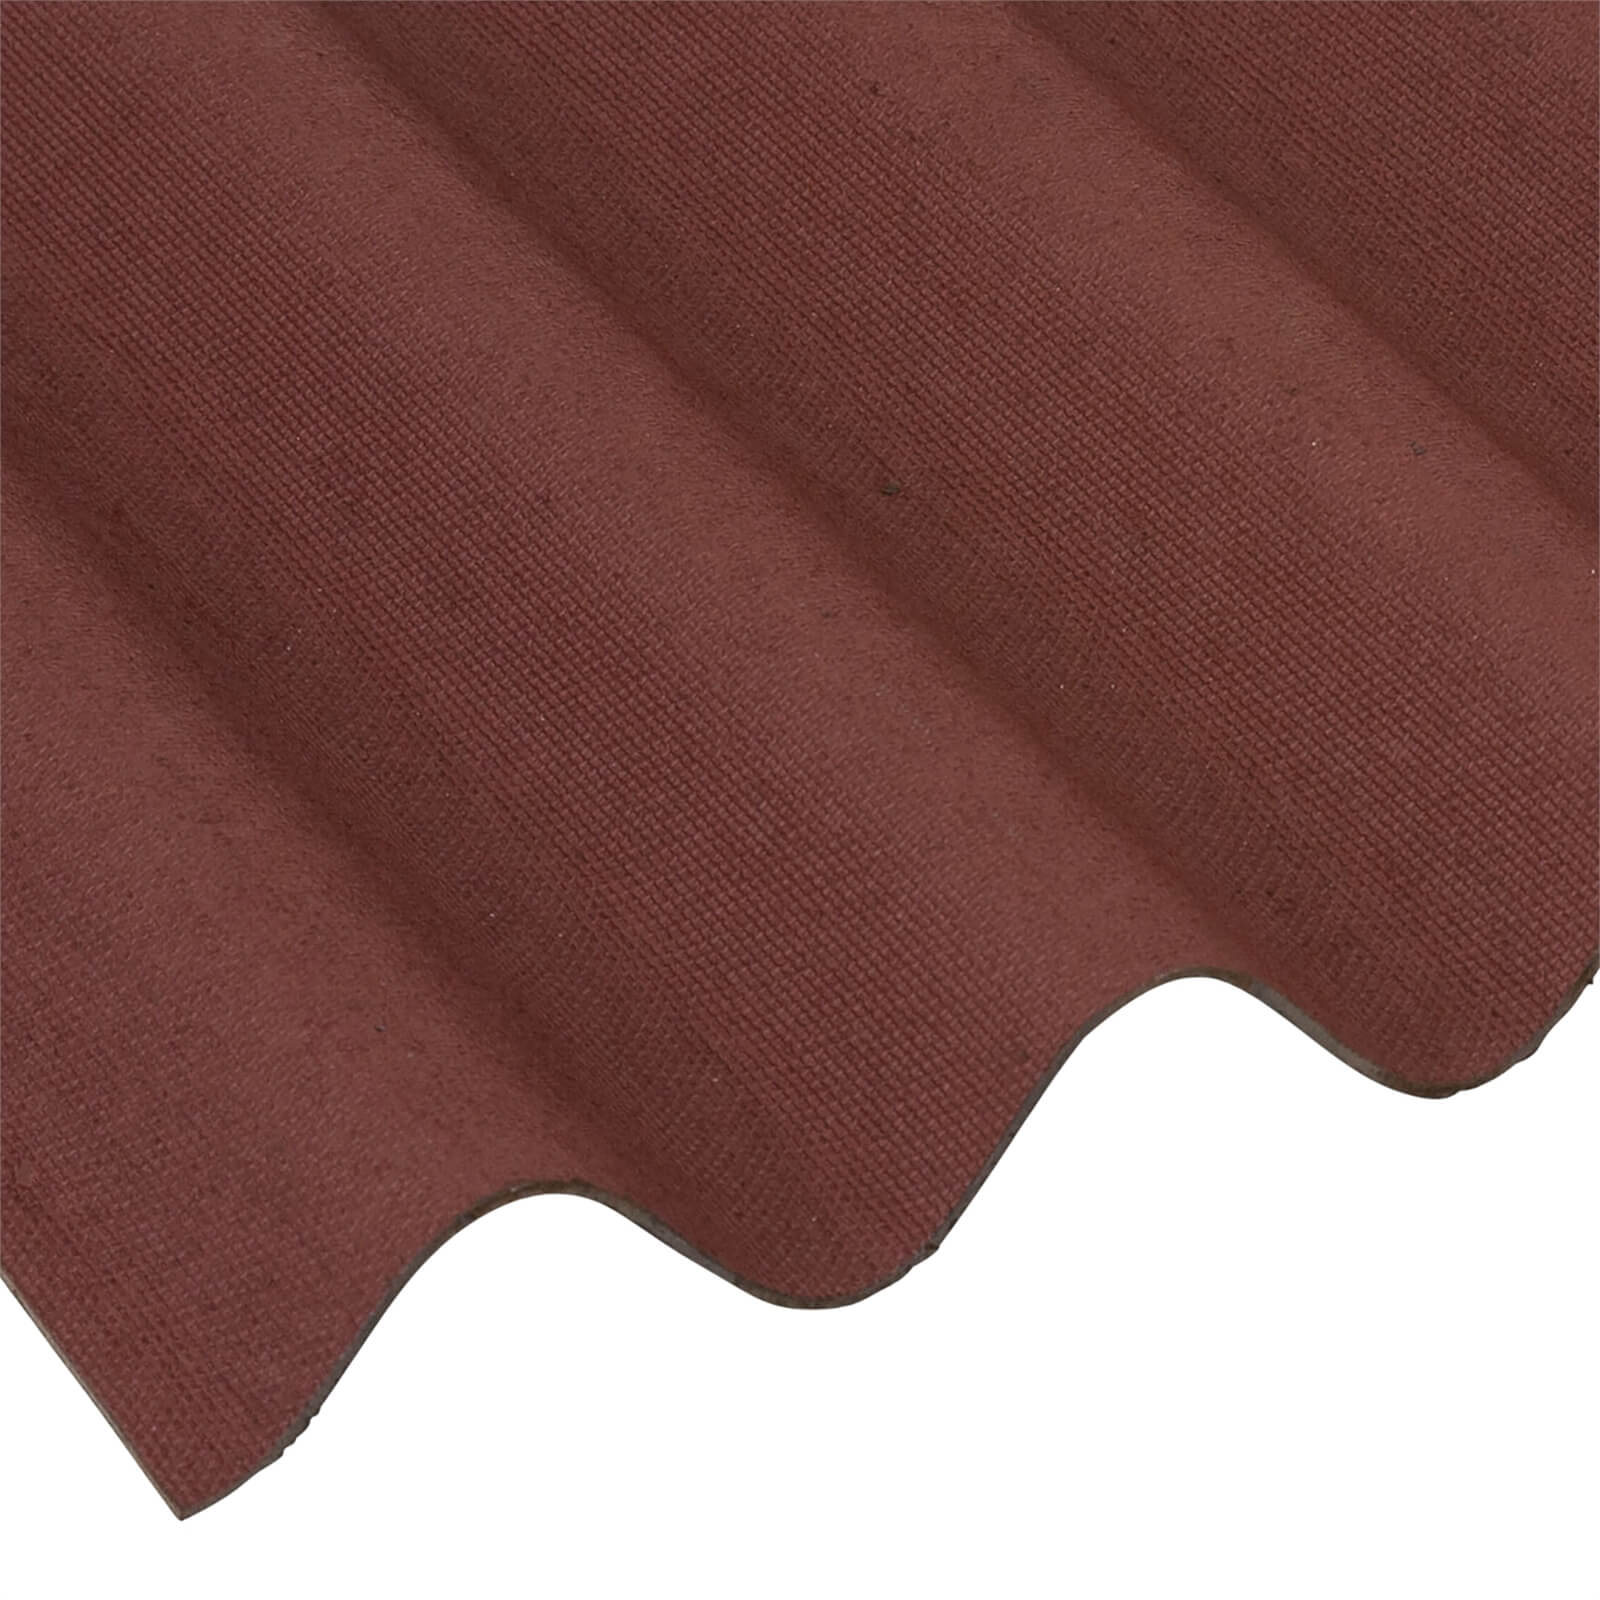 2m Coroline Red Roofing Sheet 2000 x 950 x 80mm - 5 Pack